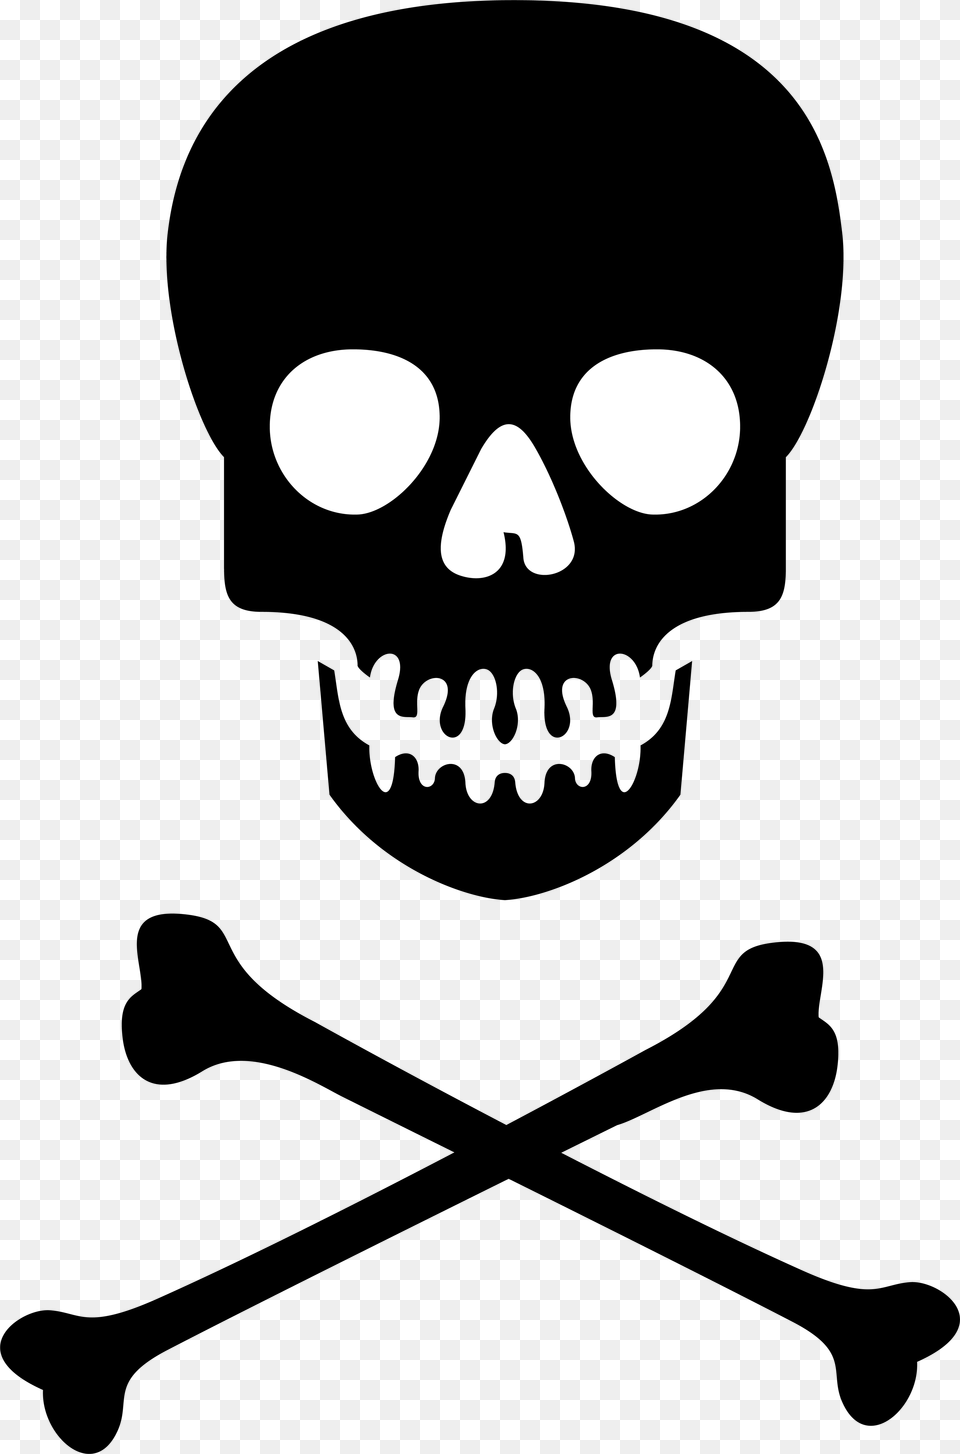 Skull And Crossbones Clipart Skull And Crossbones, Stencil, Silhouette, First Aid Png Image